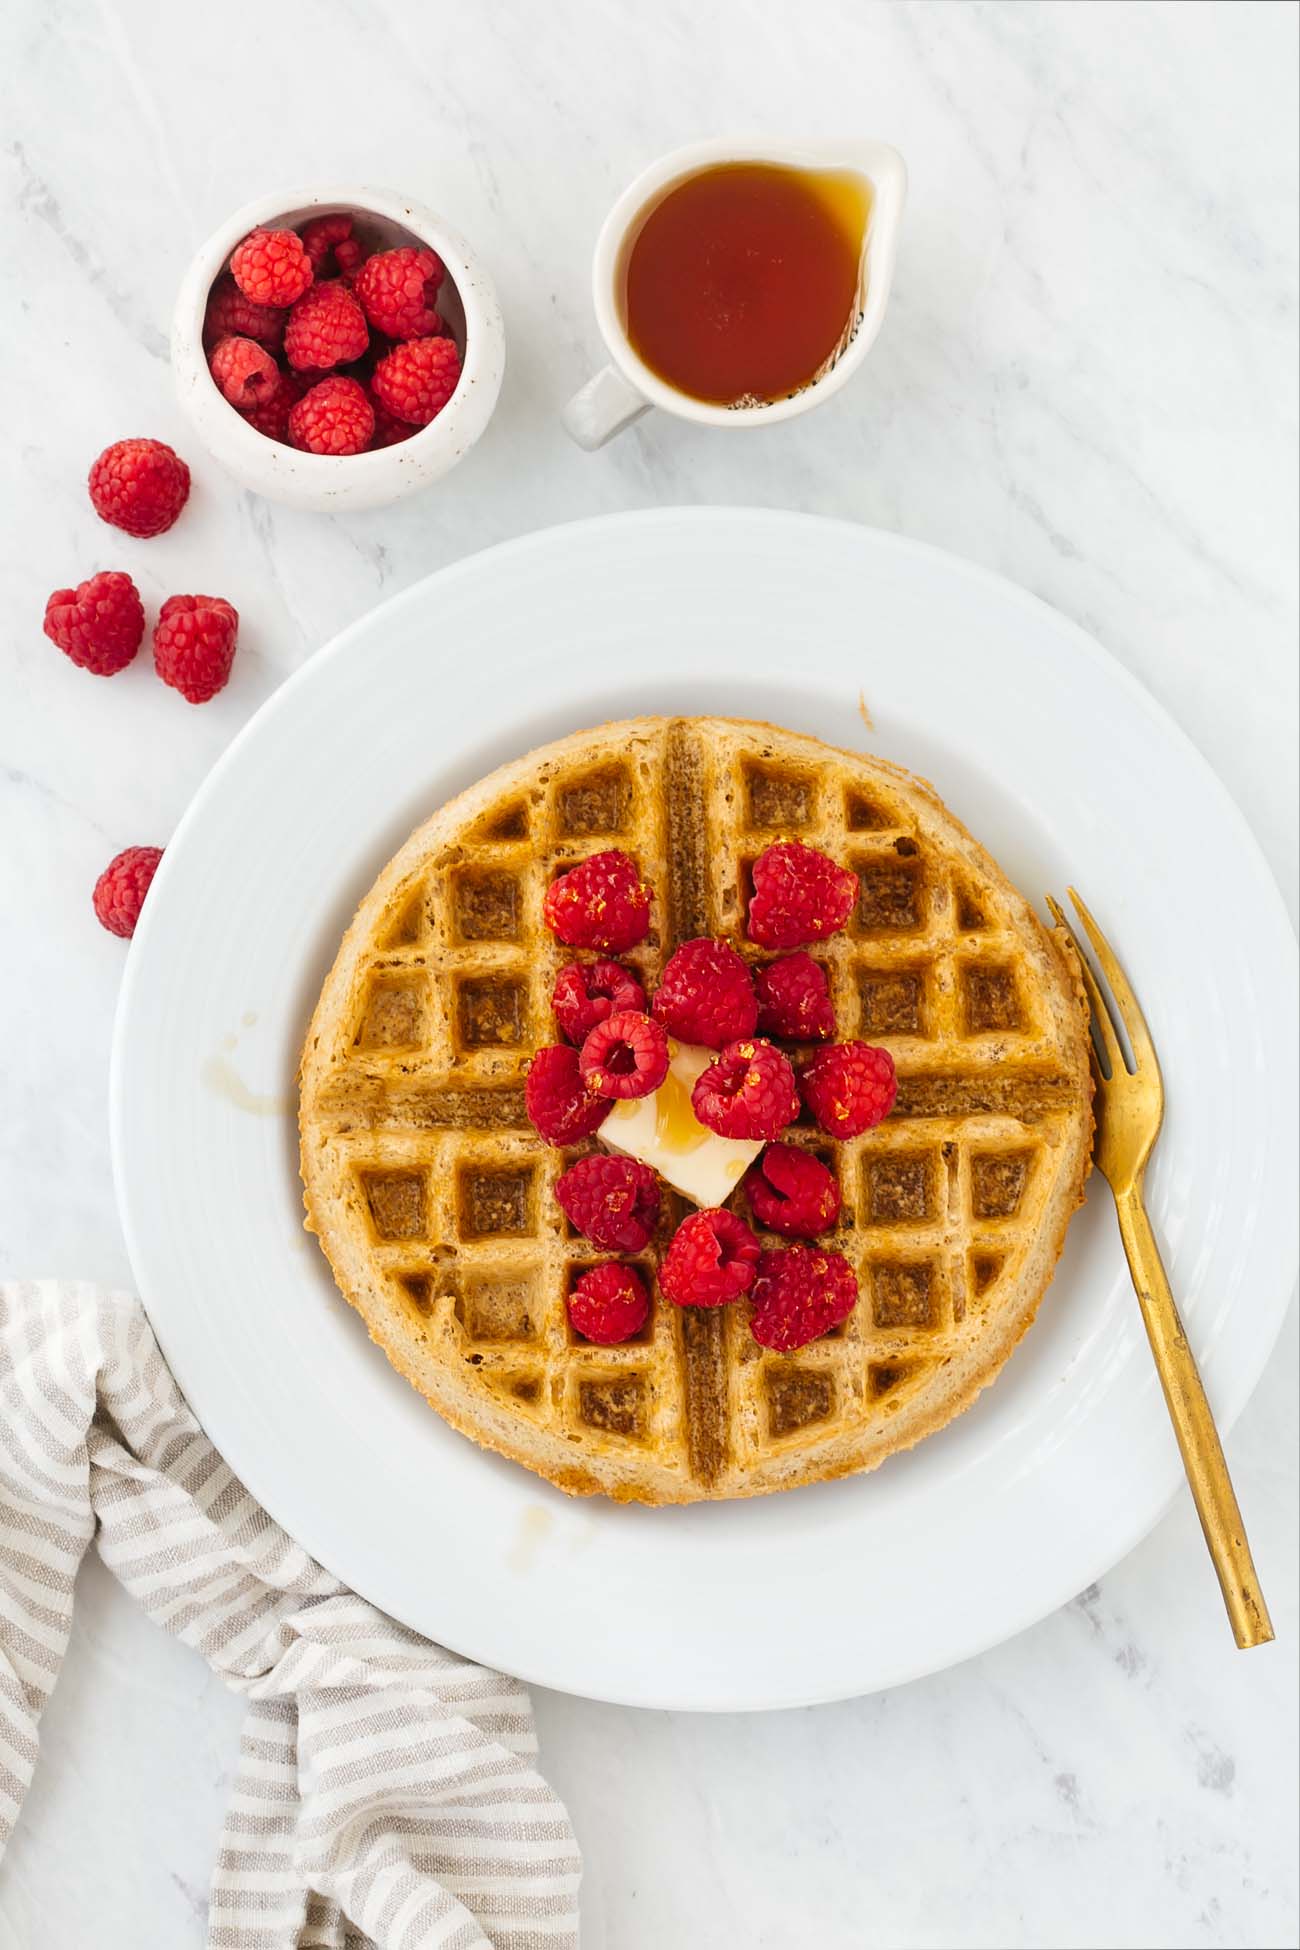 Overhead view of a gluten-free peanut butter waffle topped with fresh raspberries.